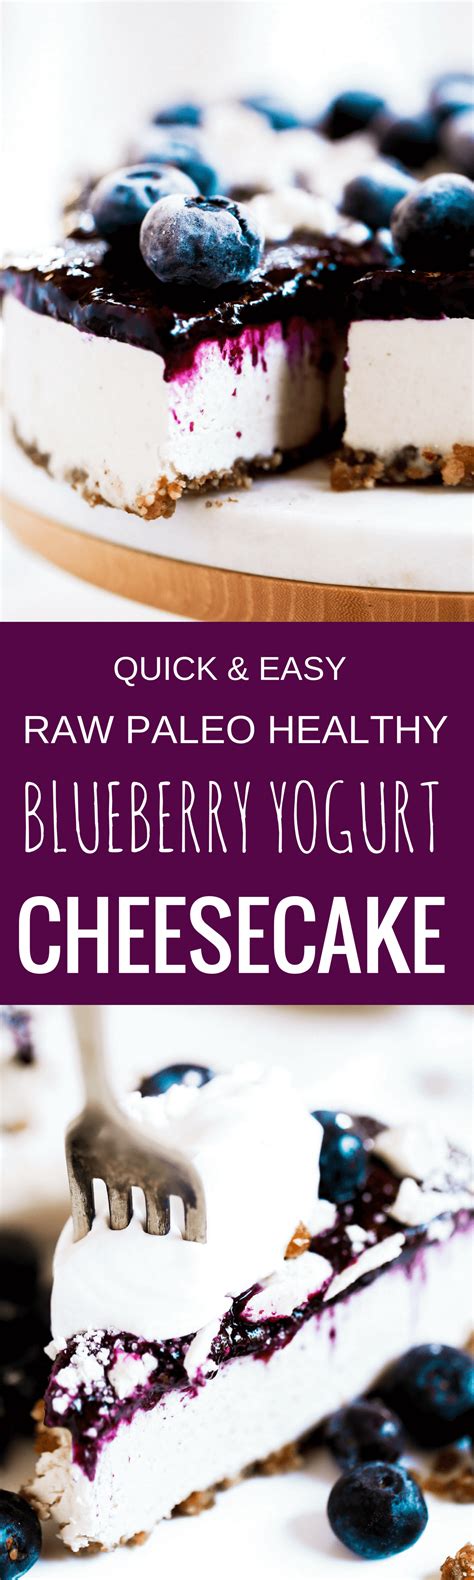 This creamy homemade greek yogurt cheesecake is so good for you that you can eat it for breakfast or a healthy dessert! Vegan Blueberry Yogurt Cheesecake | Recipe (With images ...